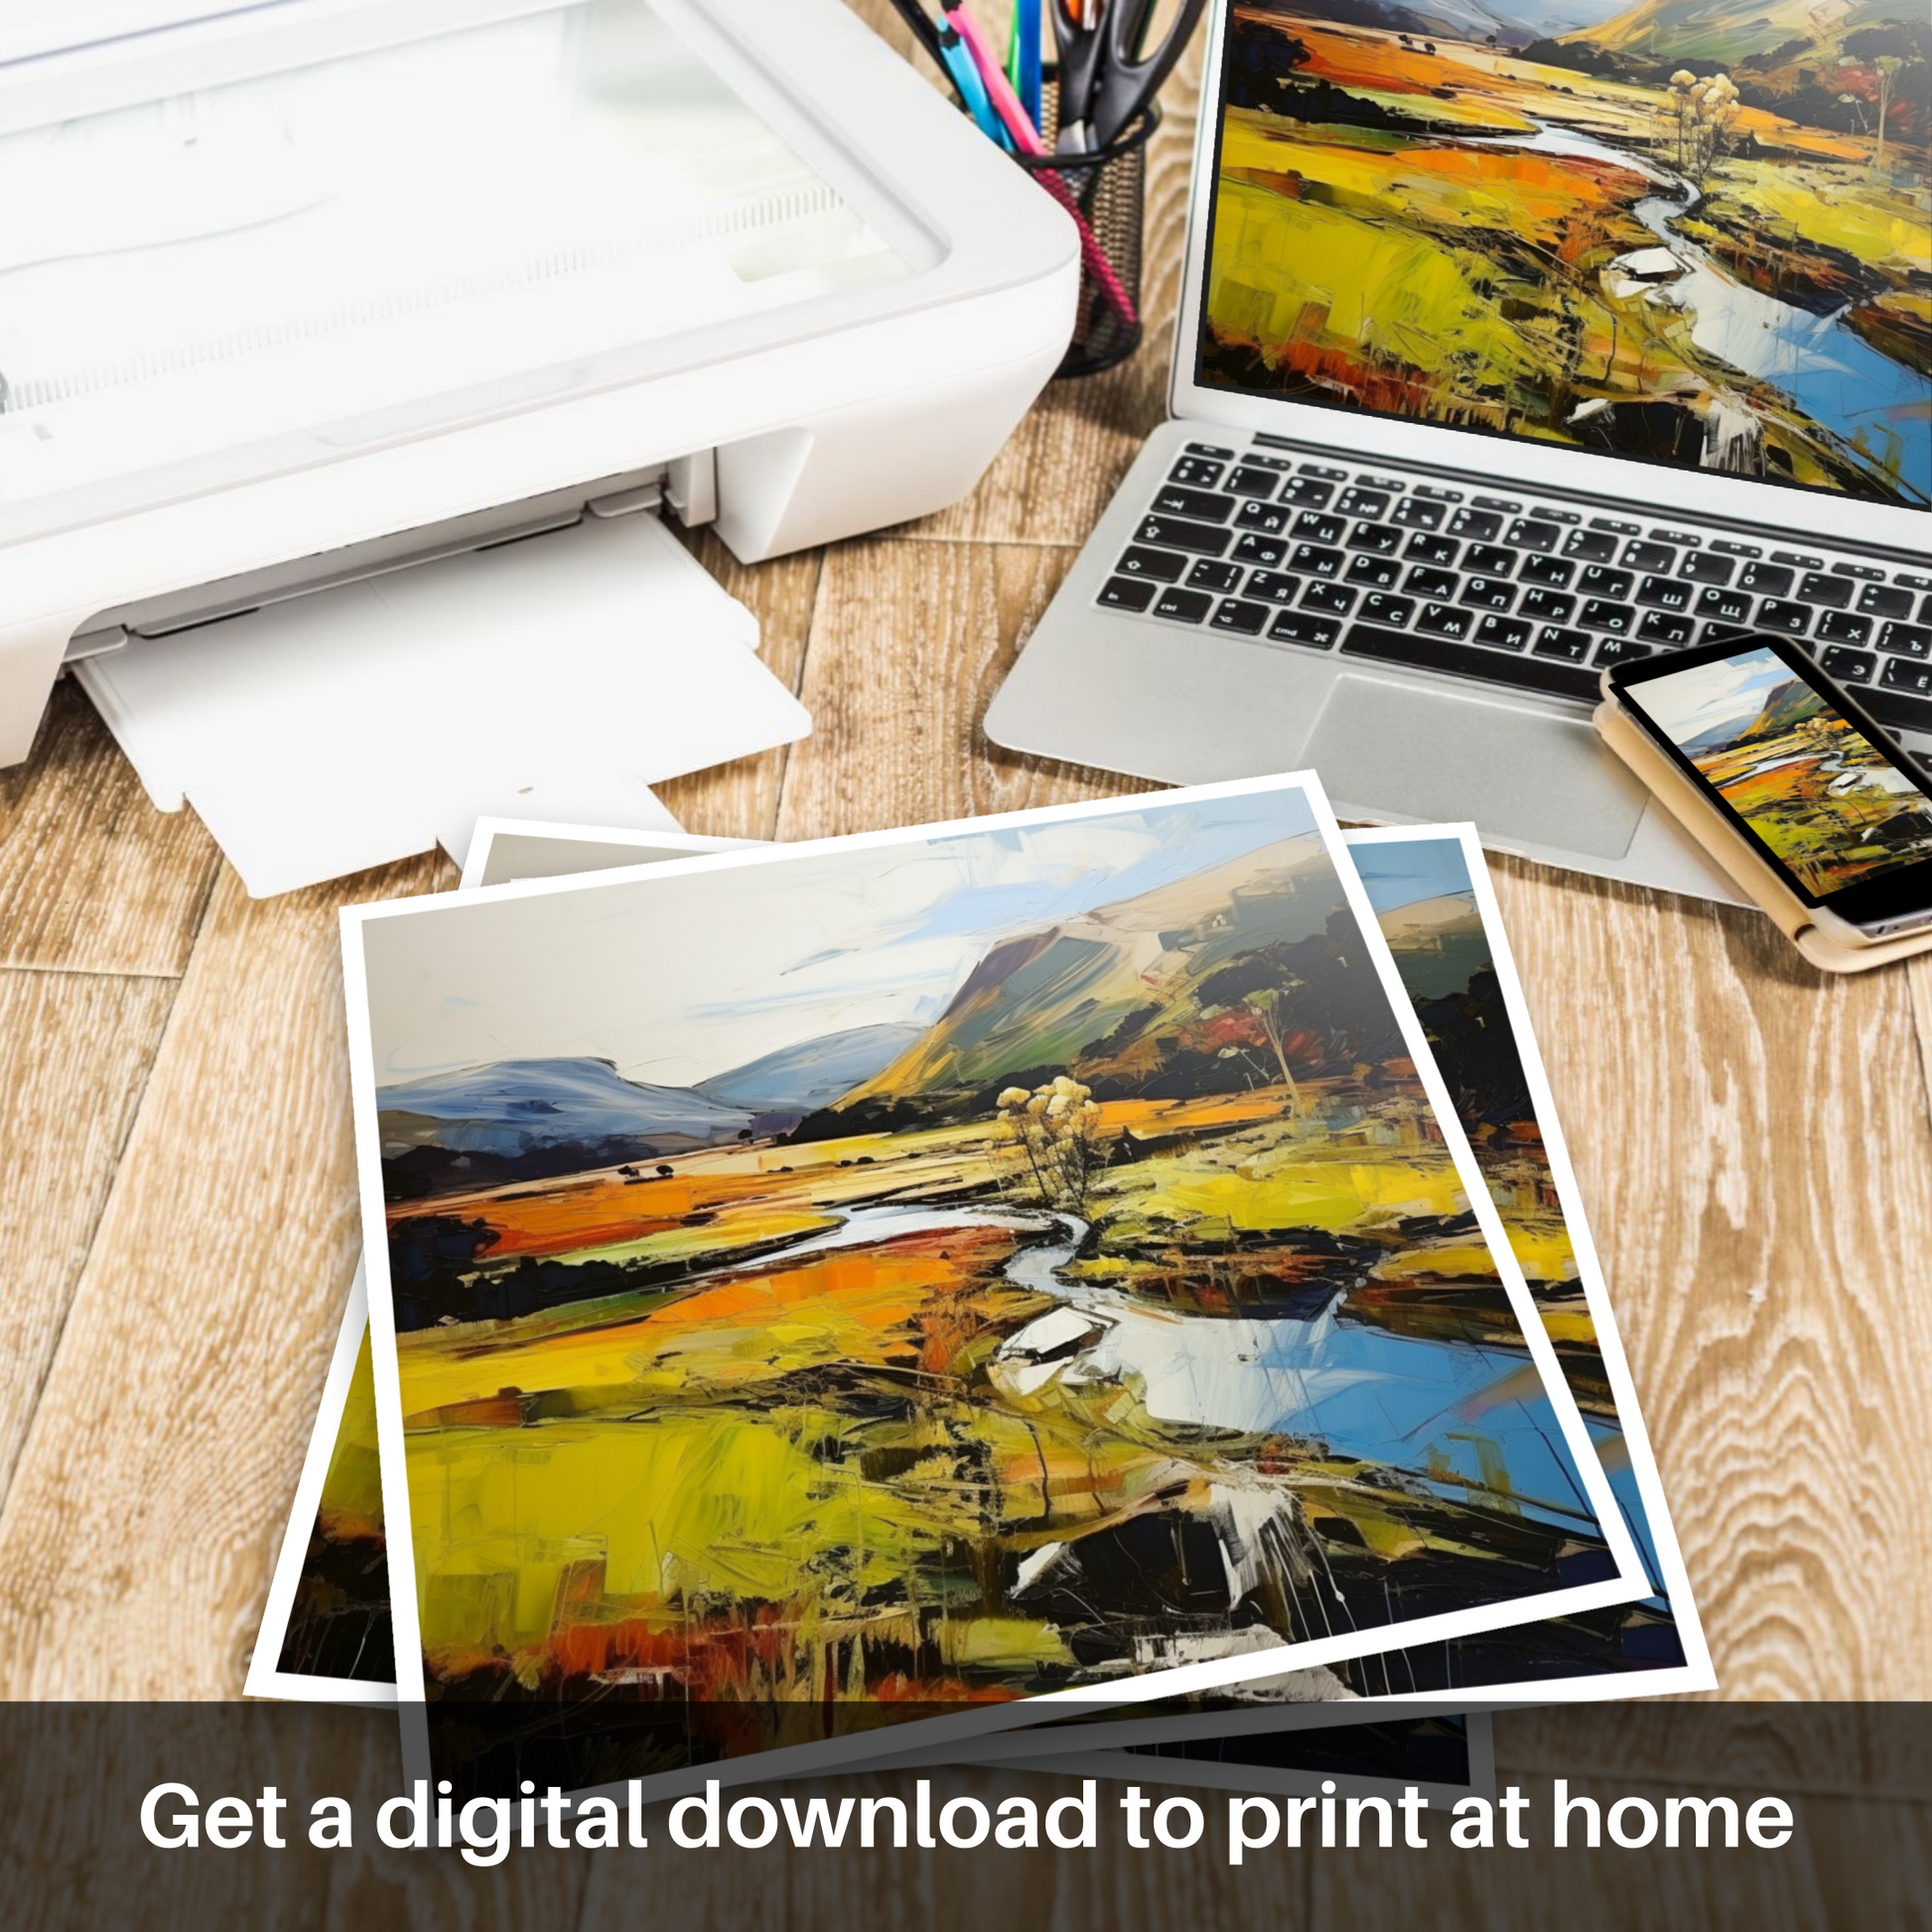 Downloadable and printable picture of Glen Esk, Angus